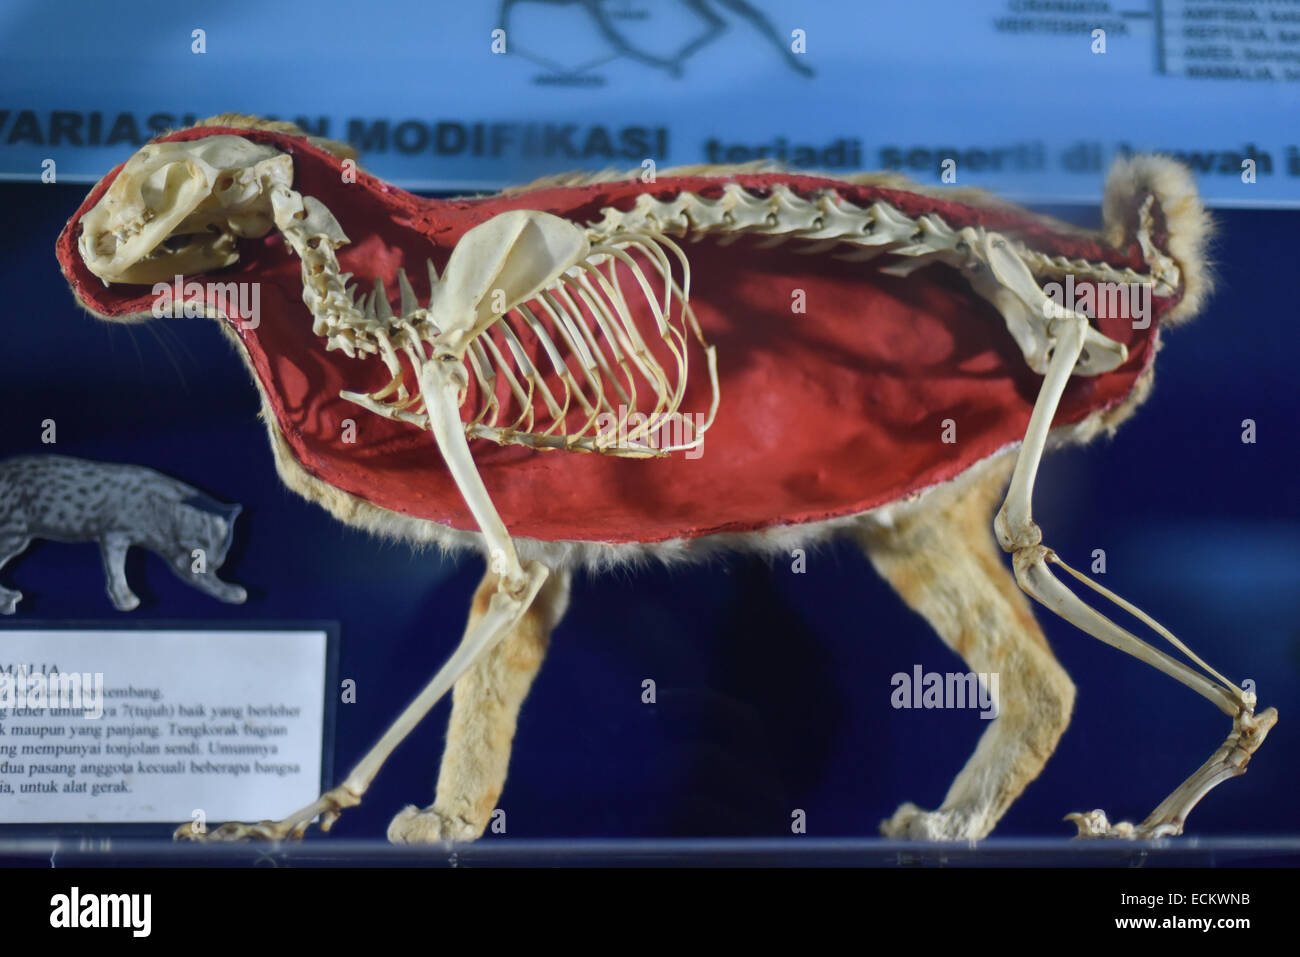 A display of mammal's vertebrate structures at Zoology Museum in Bogor, West Java, Indonesia. Stock Photo